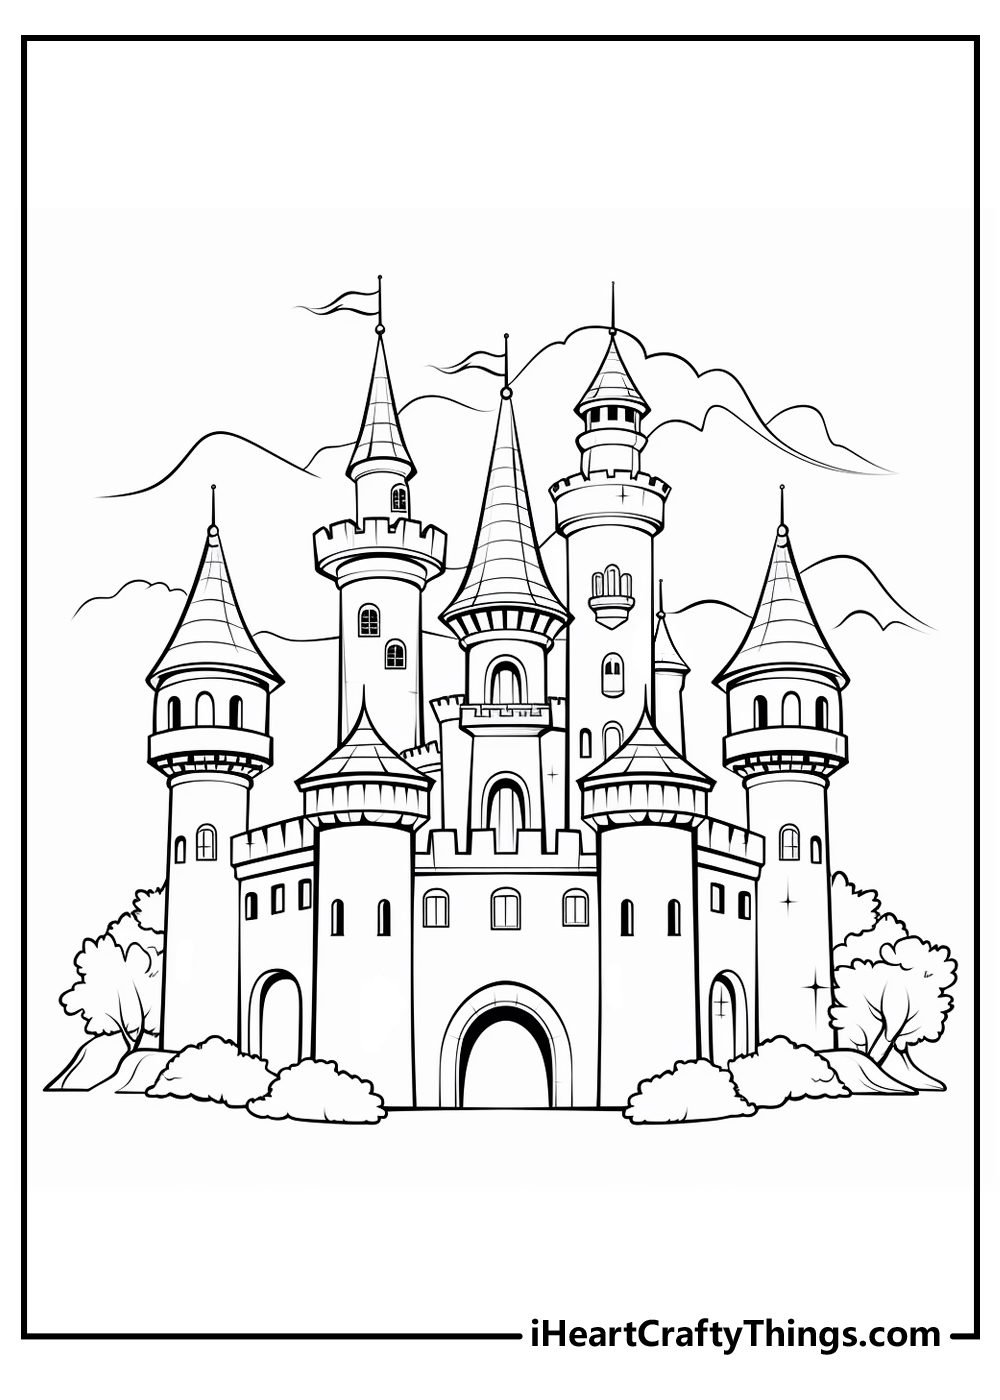 castle coloring pages for adults